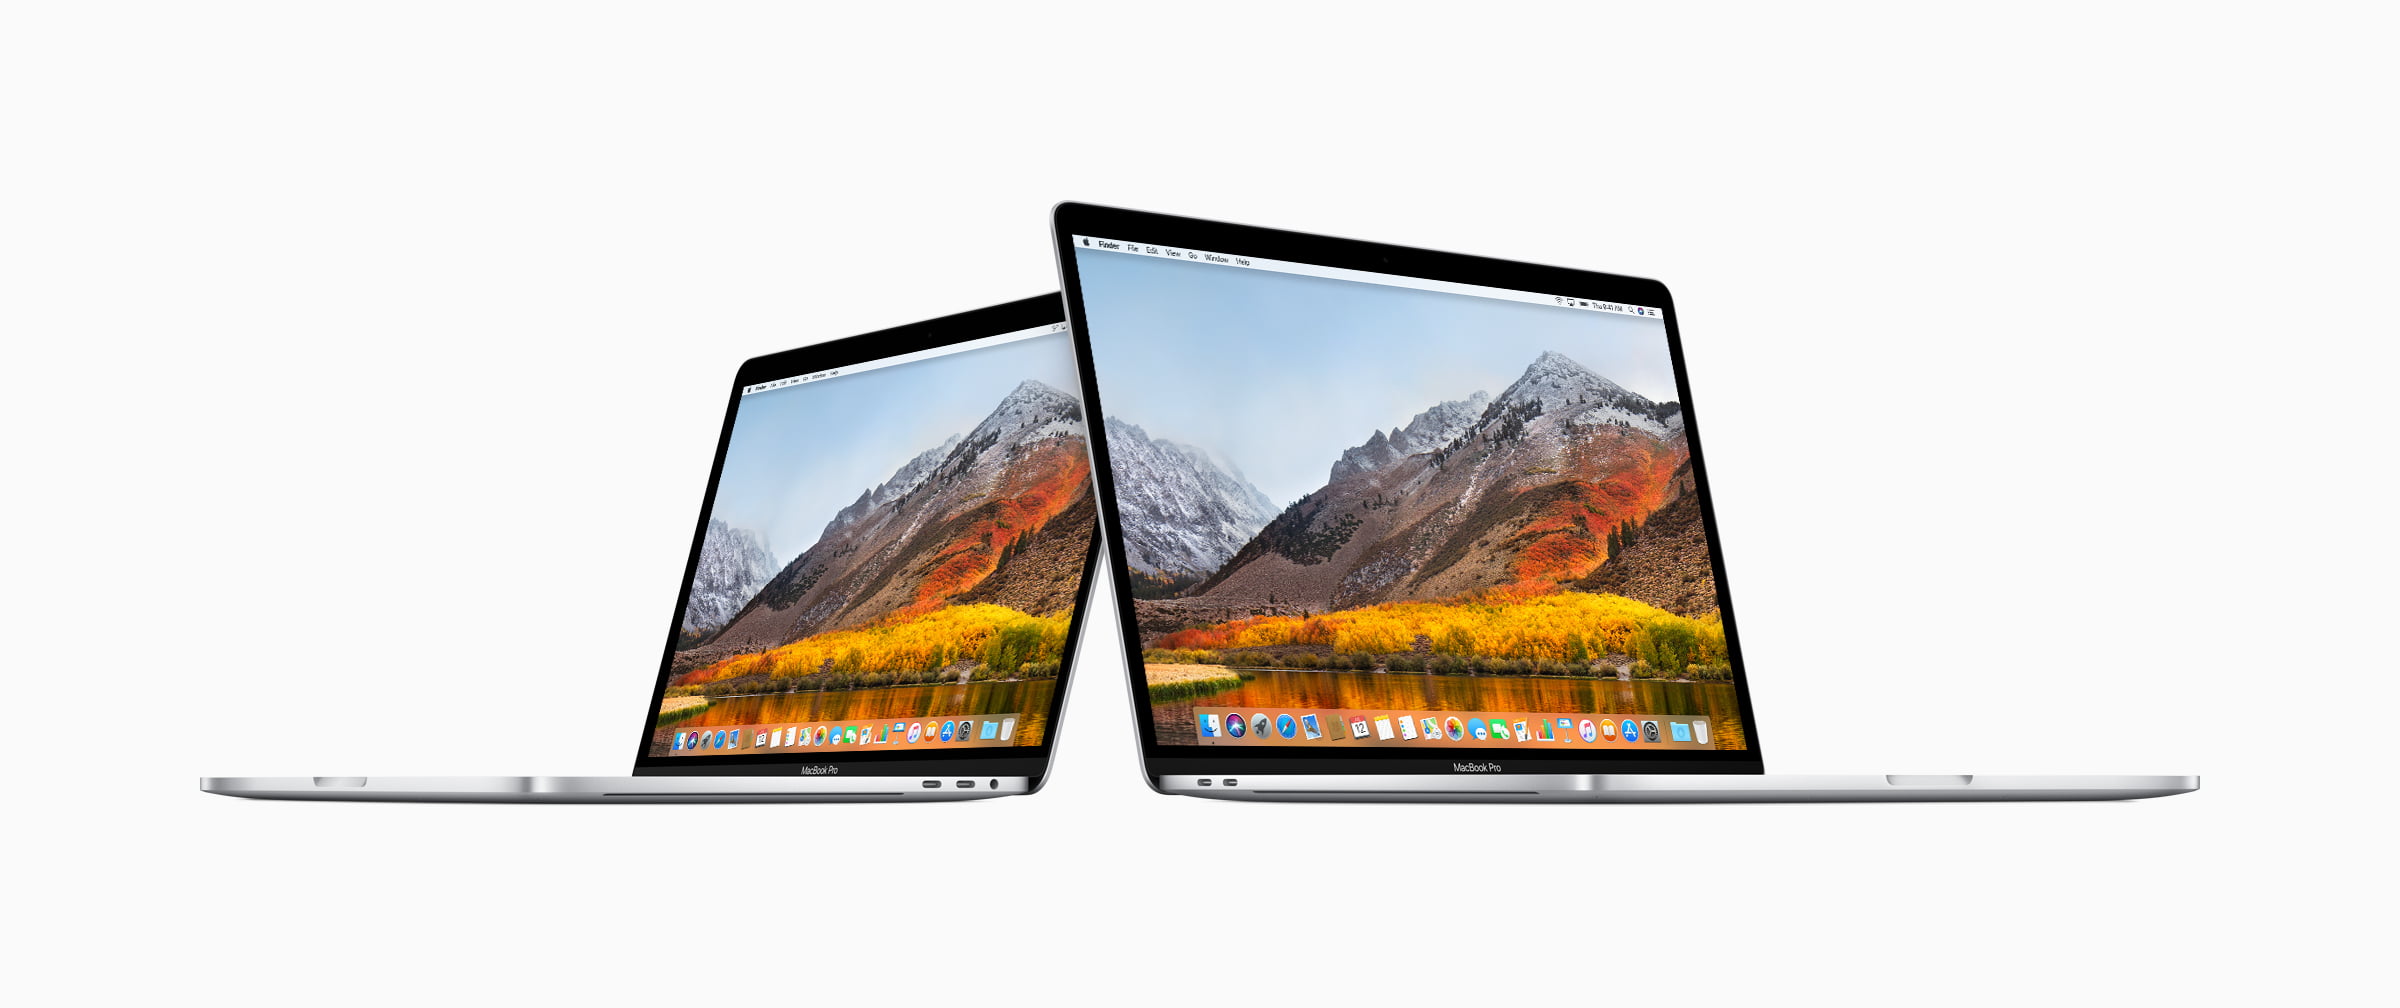 Macbook Pro 2018: Perfection At Its Best